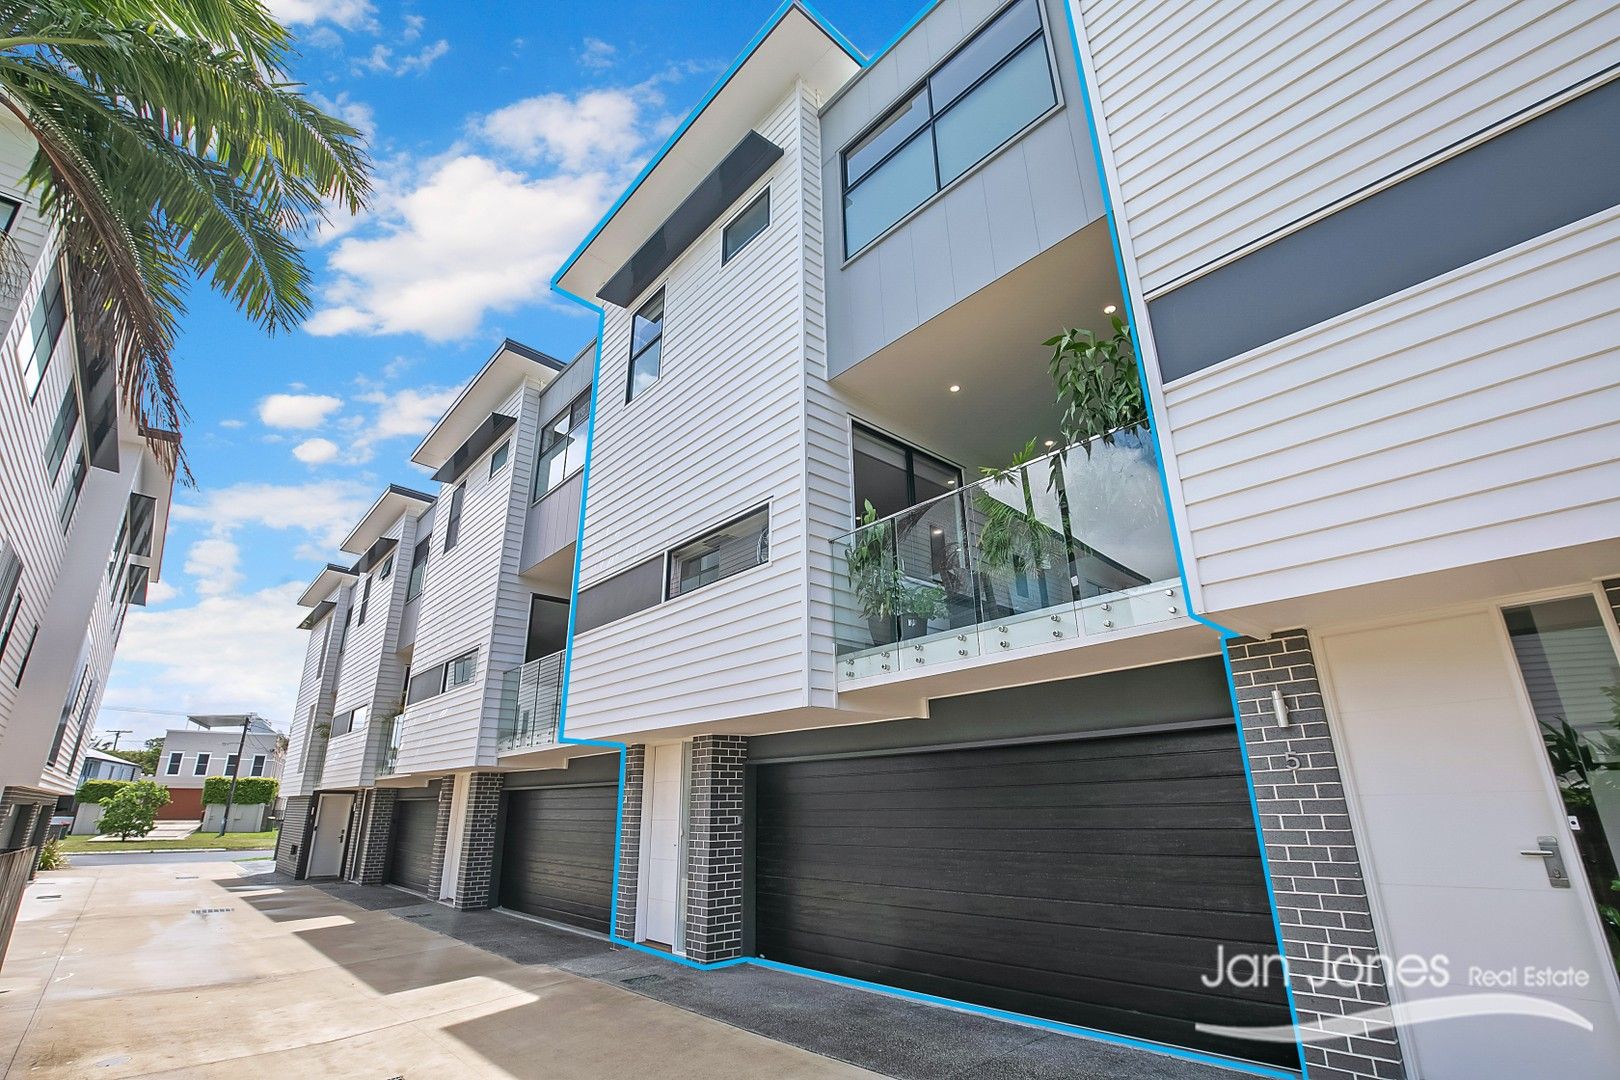 2 bedrooms Townhouse in 4/32 John Street REDCLIFFE QLD, 4020